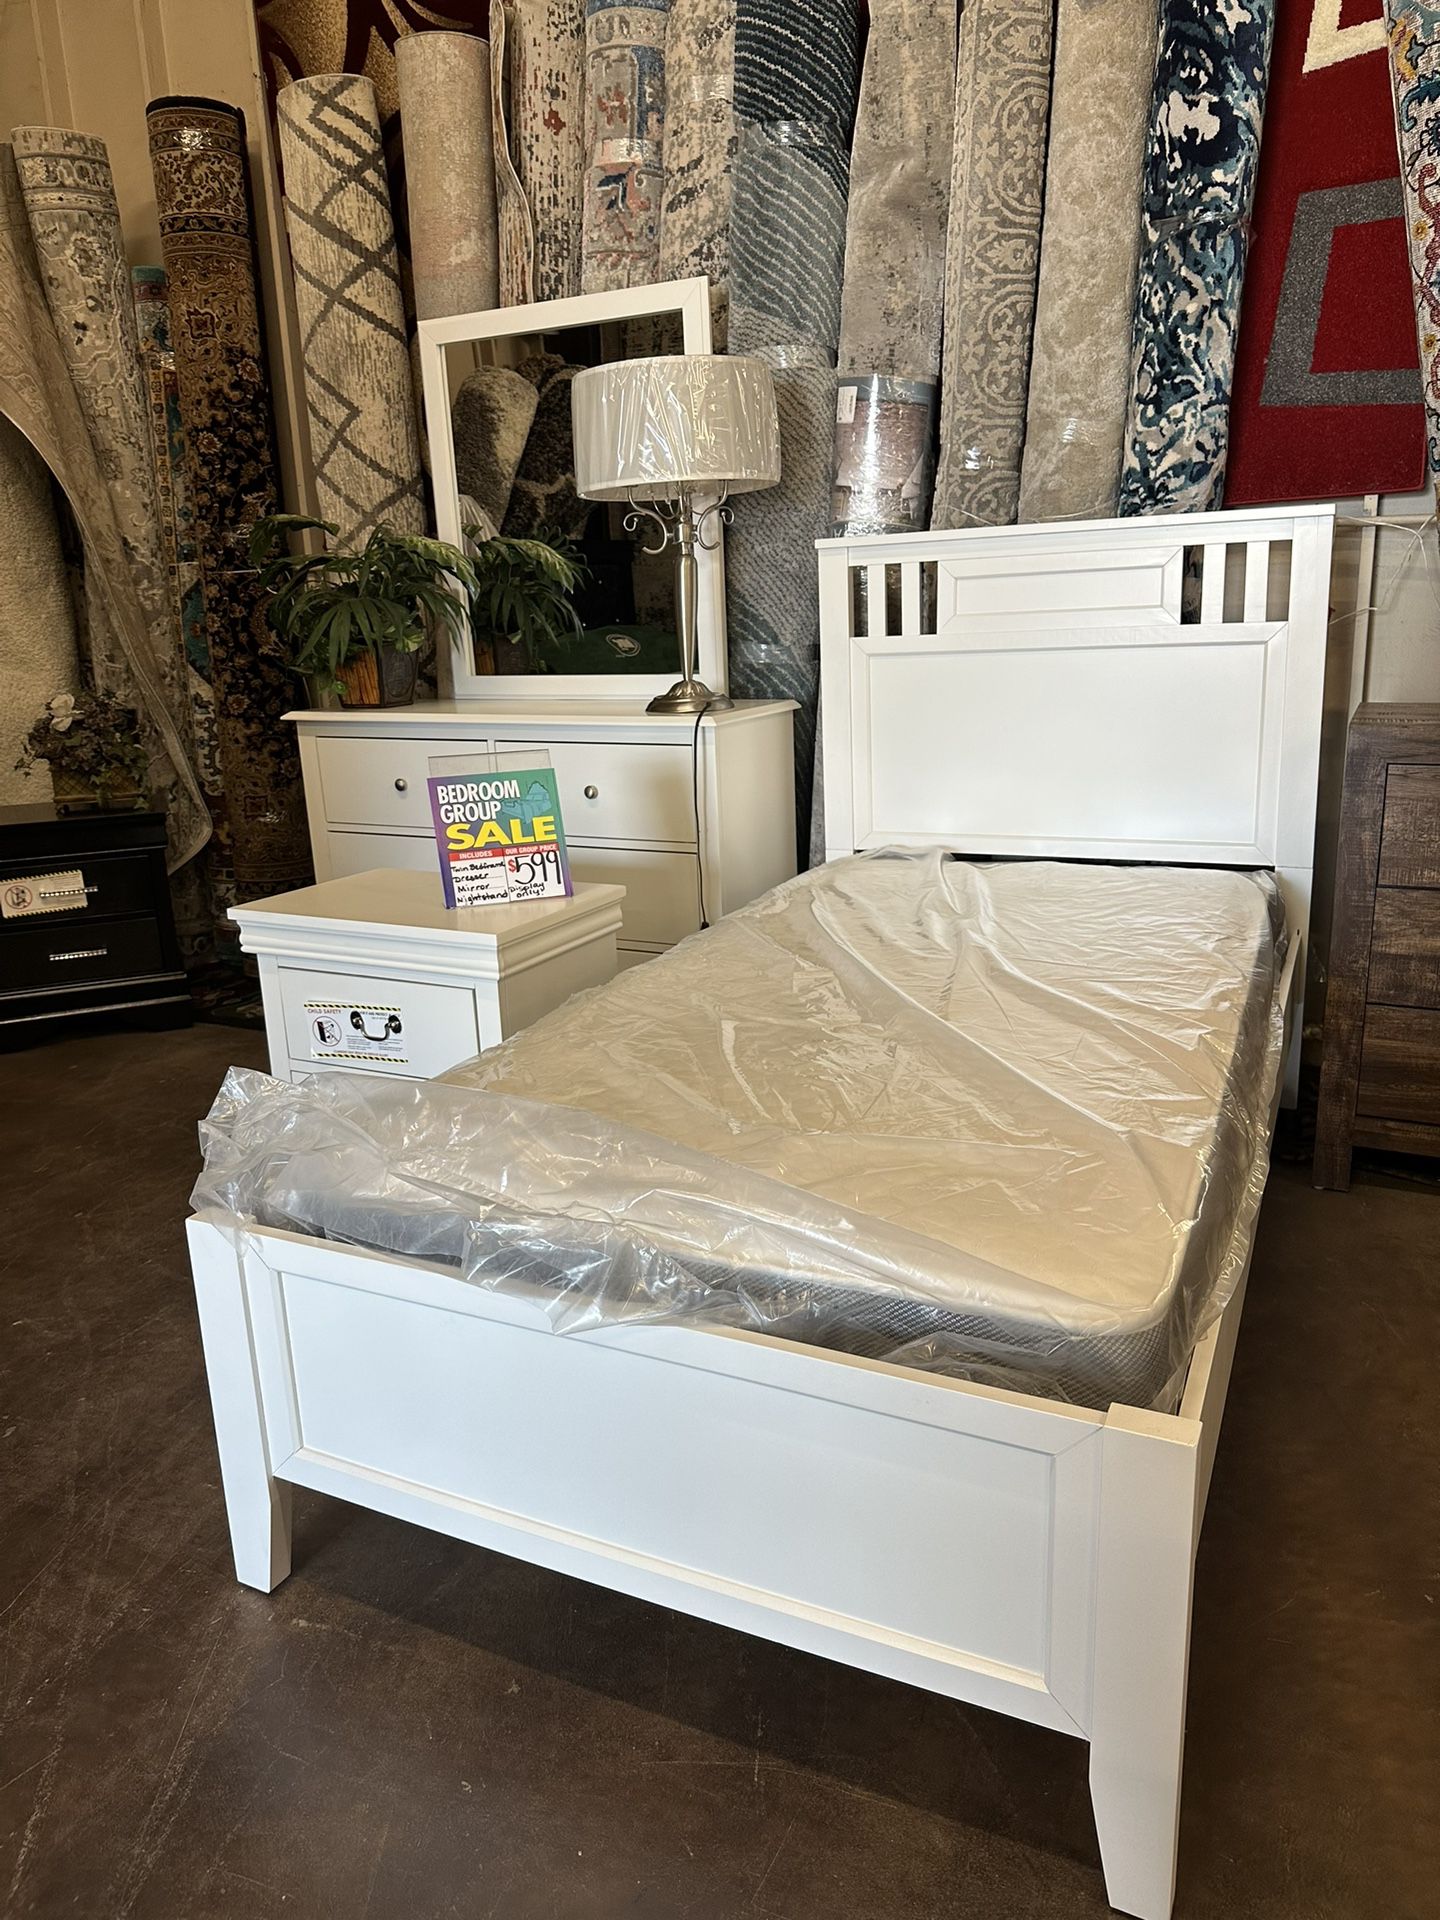 Twin Bed Set